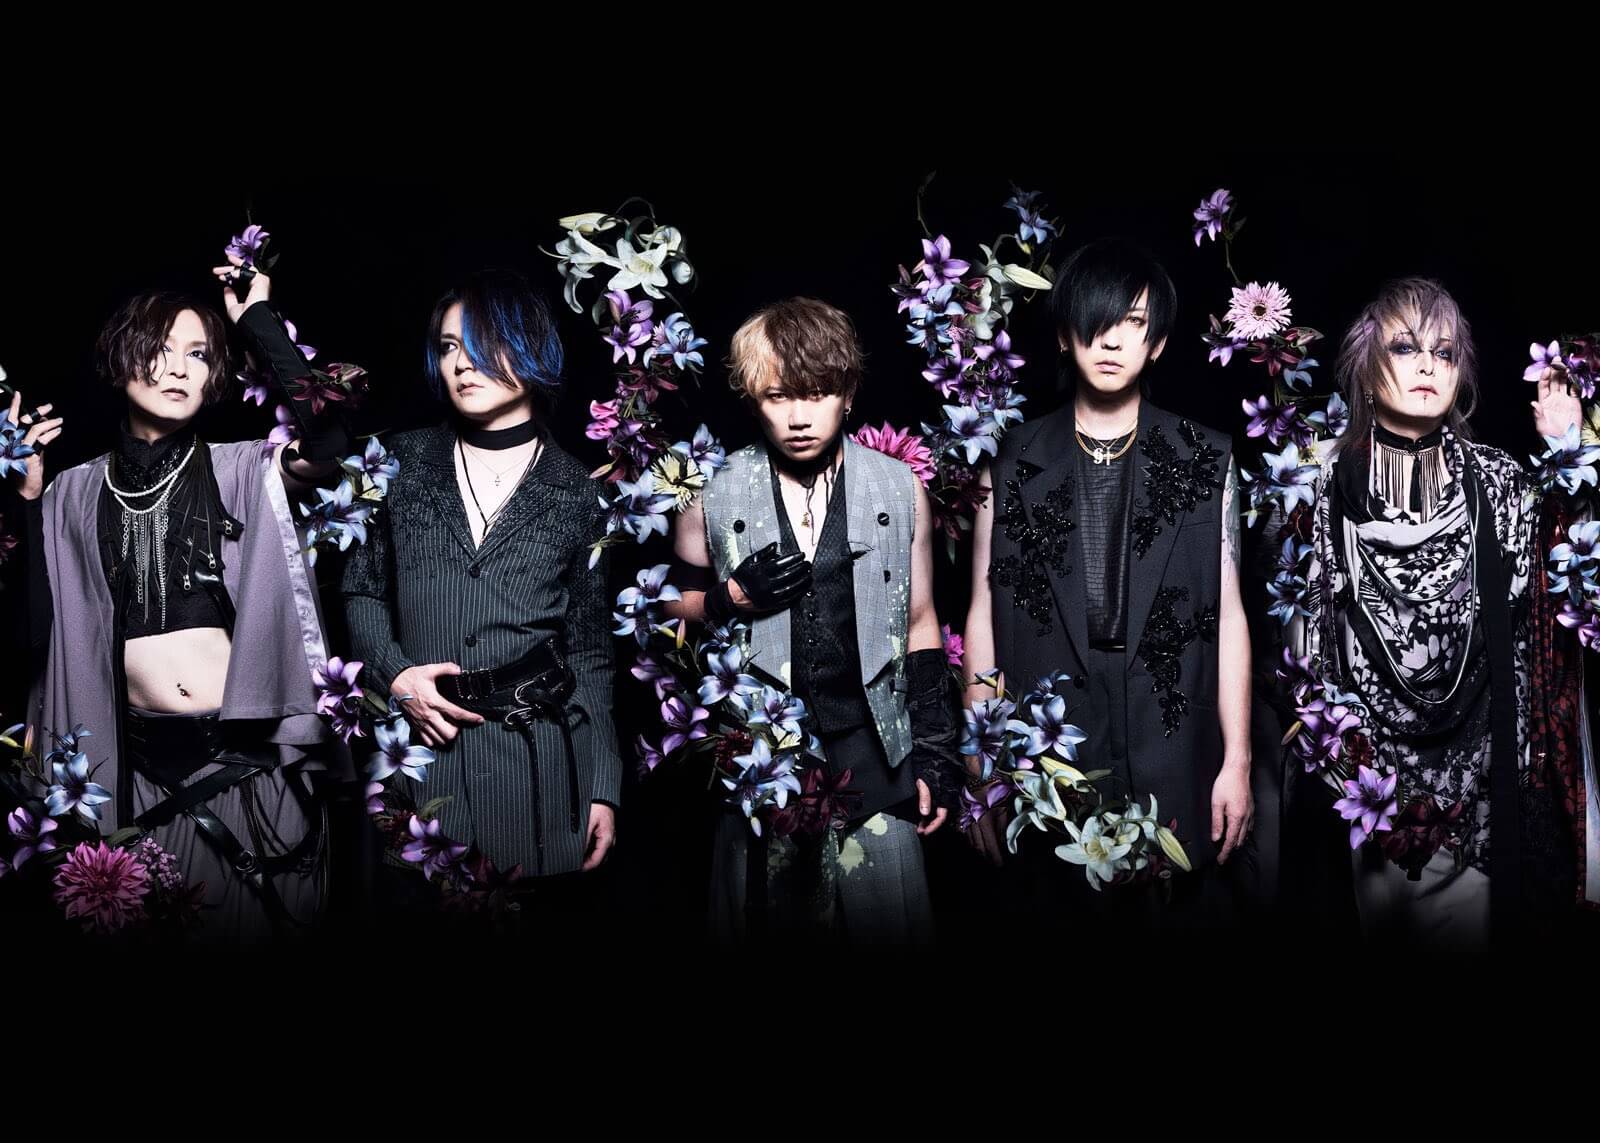 NIGHTMARE new maxi-single: “With”